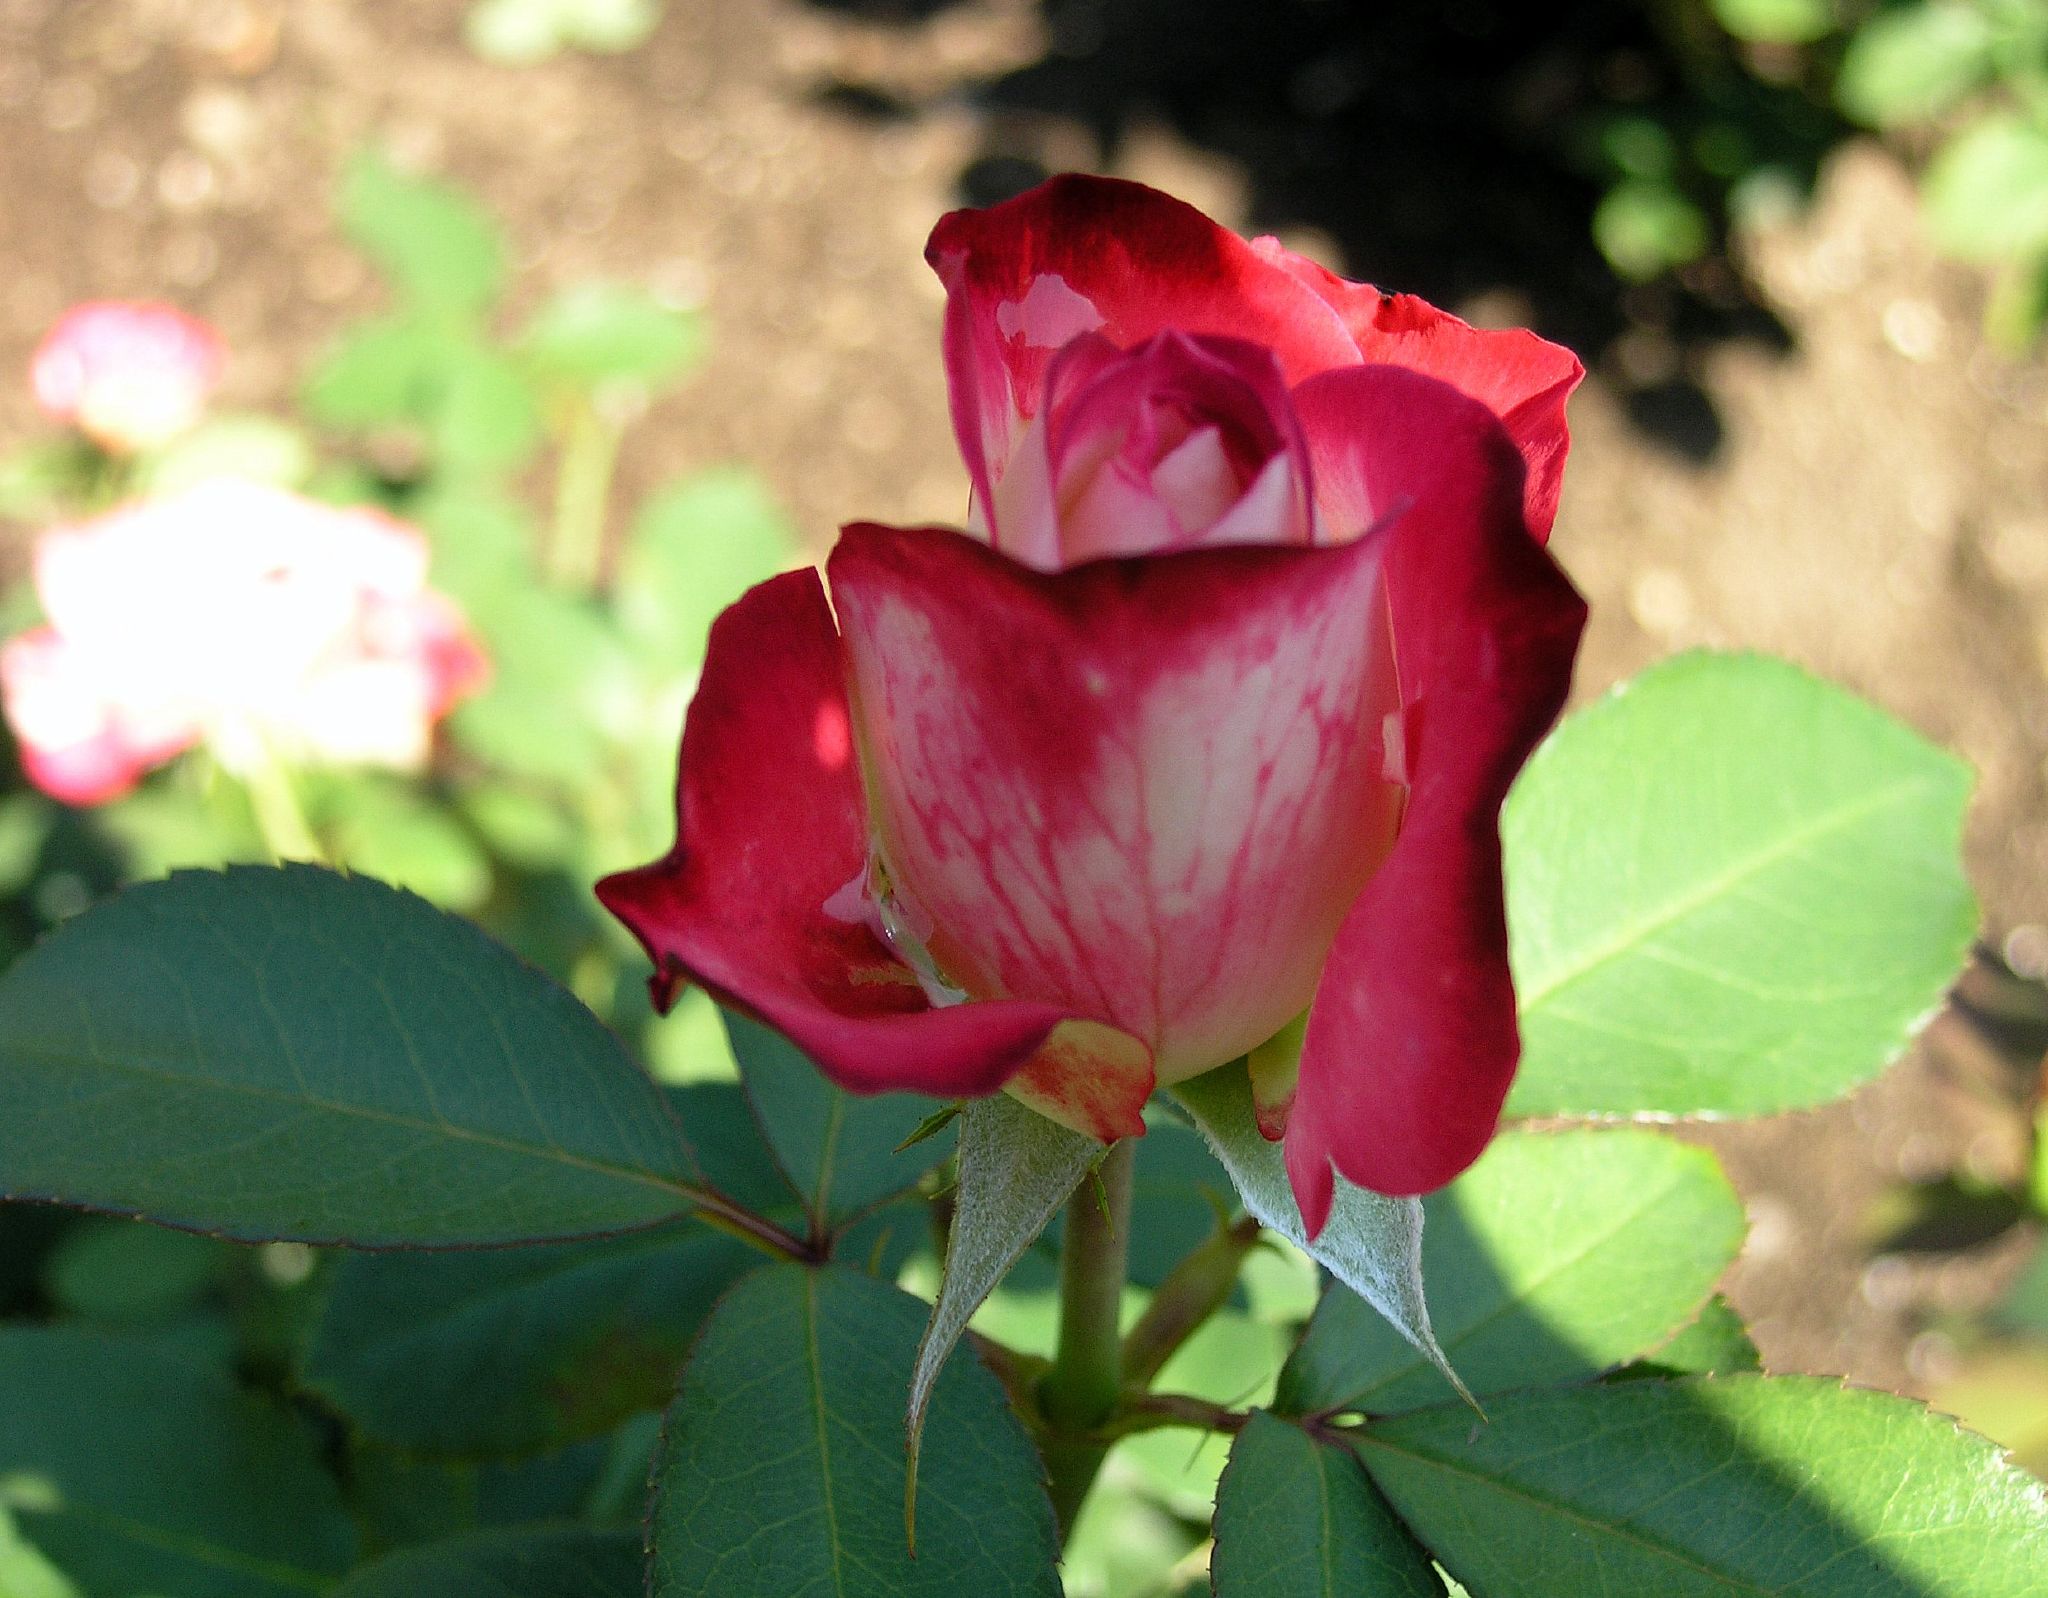 a single blooming rose sits in the middle of some green leaves